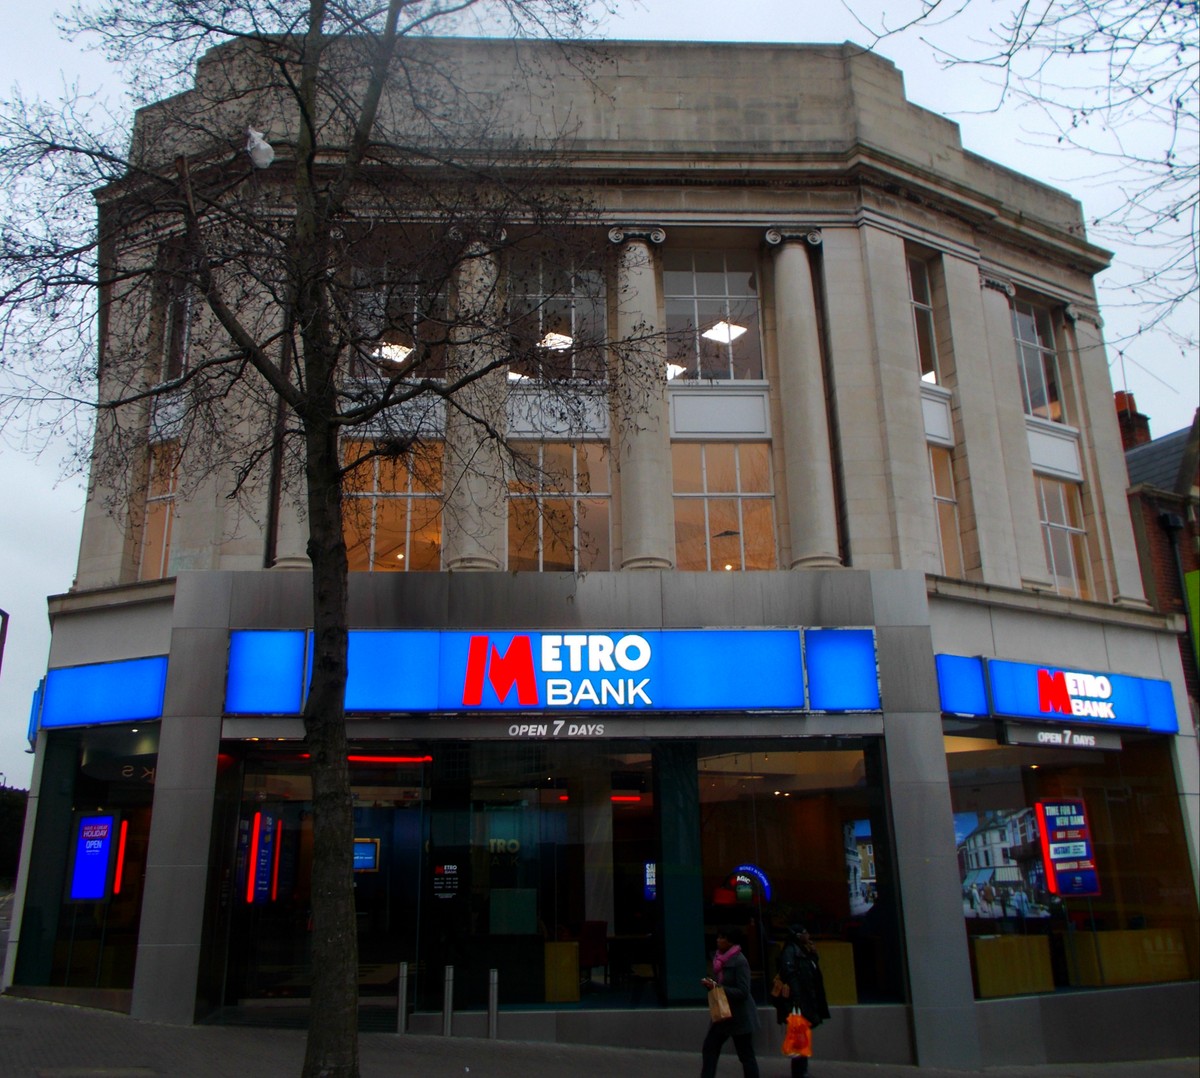 In the United Kingdom, Metro Bank announces financial rescue package amid difficulties  Companies